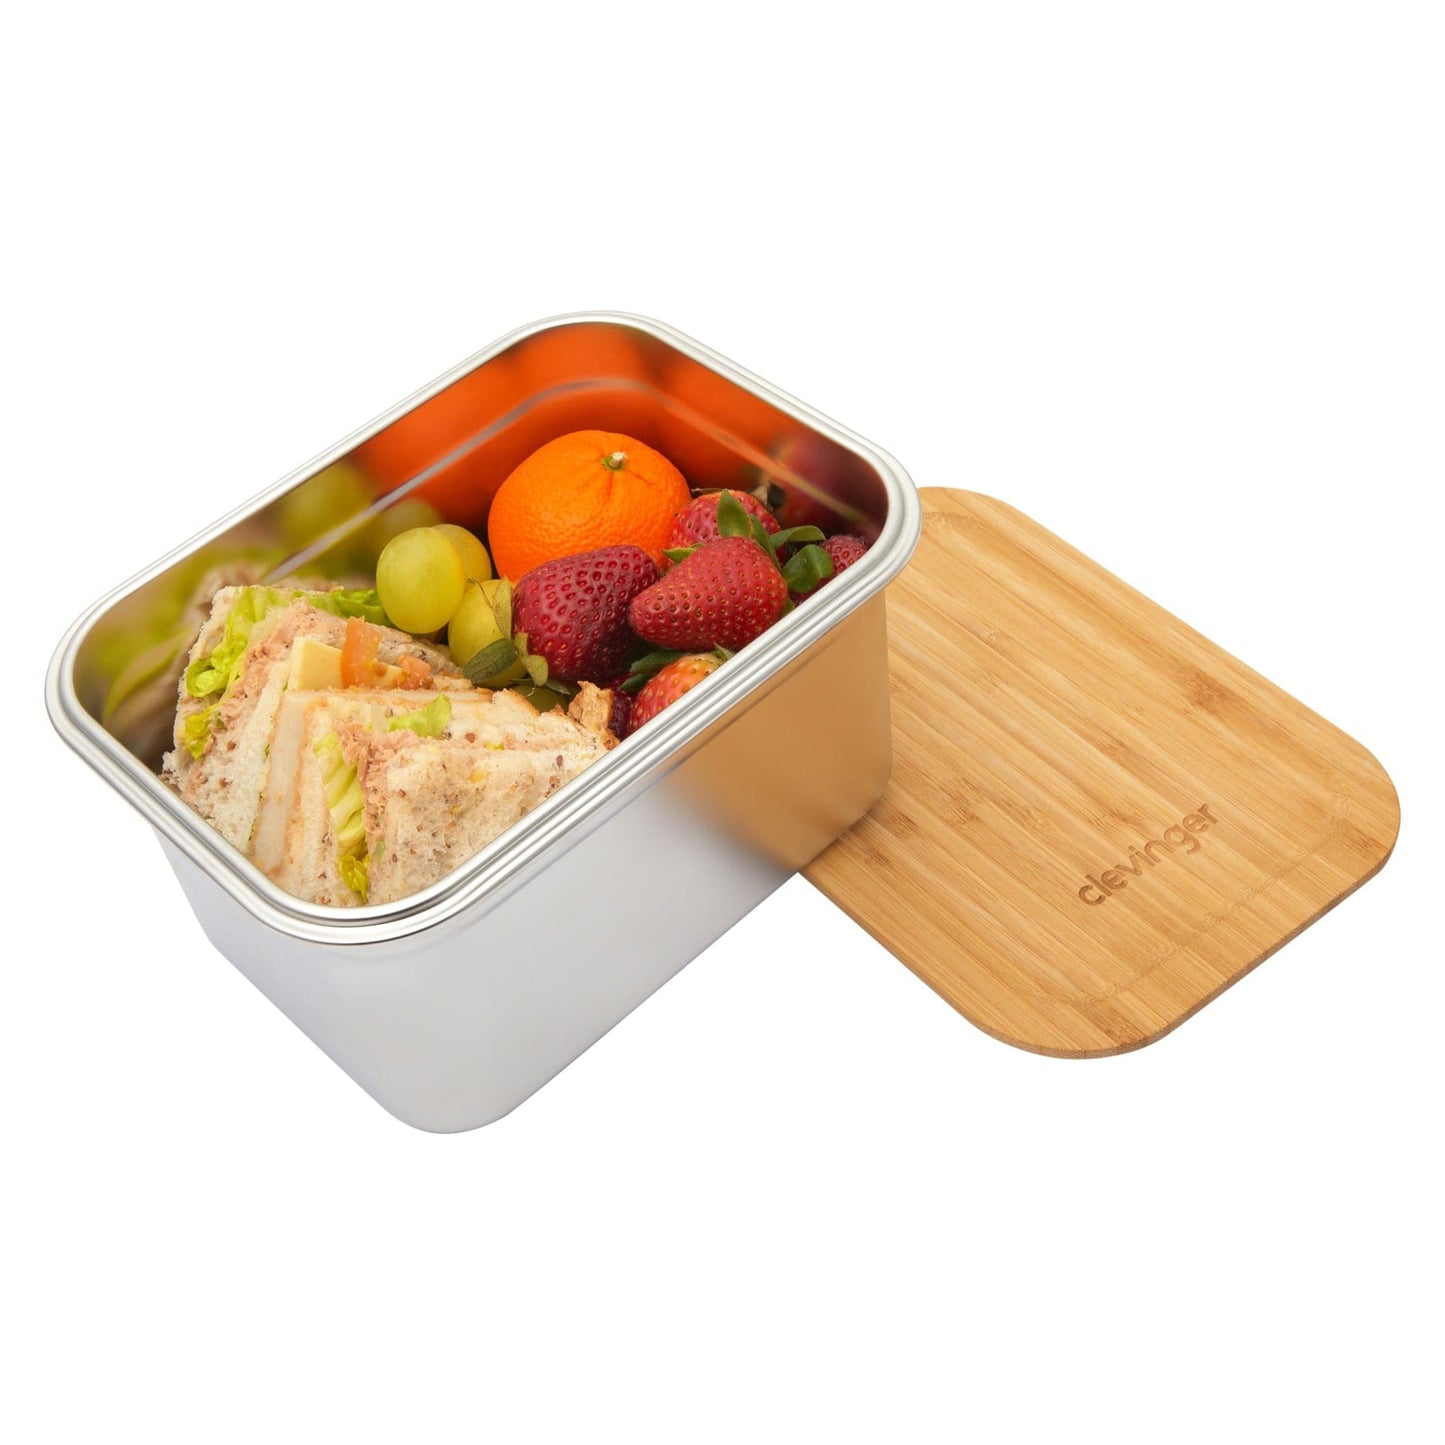 Clevinger Lunch Box Clevinger Stainless Steel Bamboo Extra Large Lunch Box 2000ml